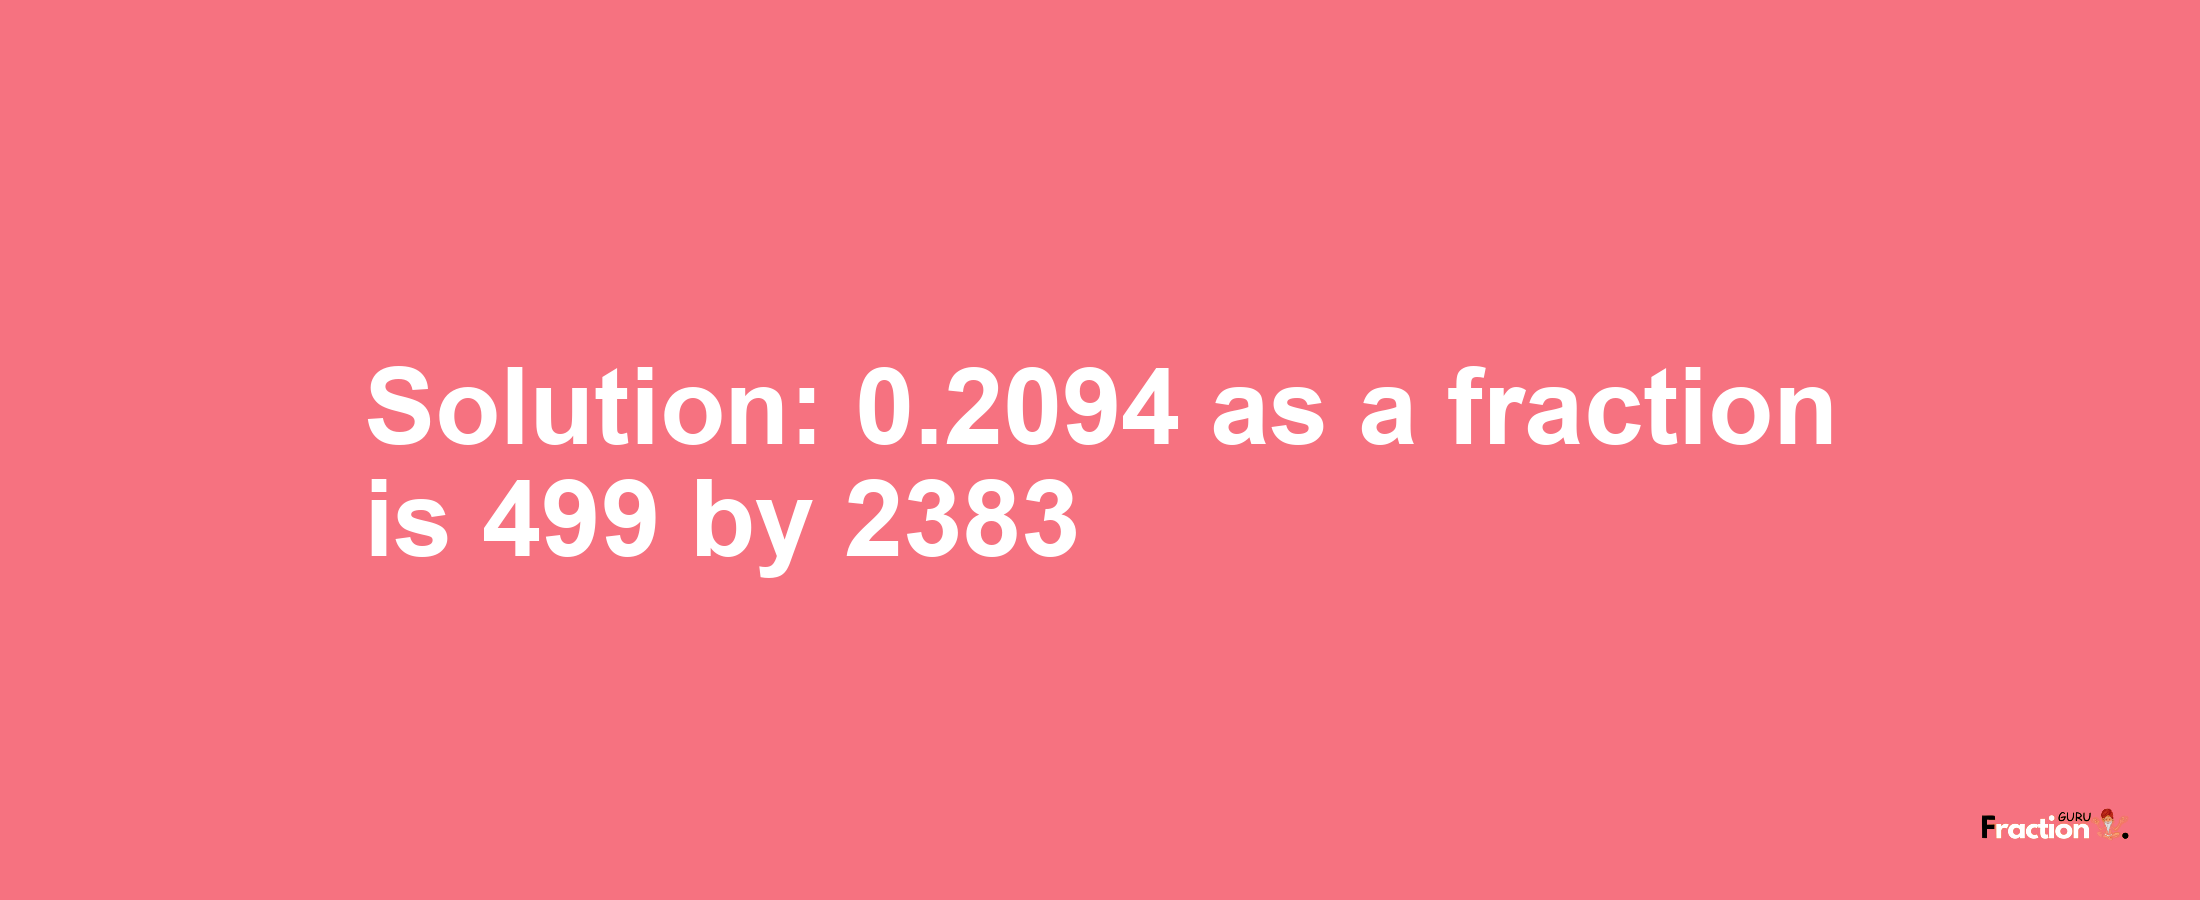 Solution:0.2094 as a fraction is 499/2383